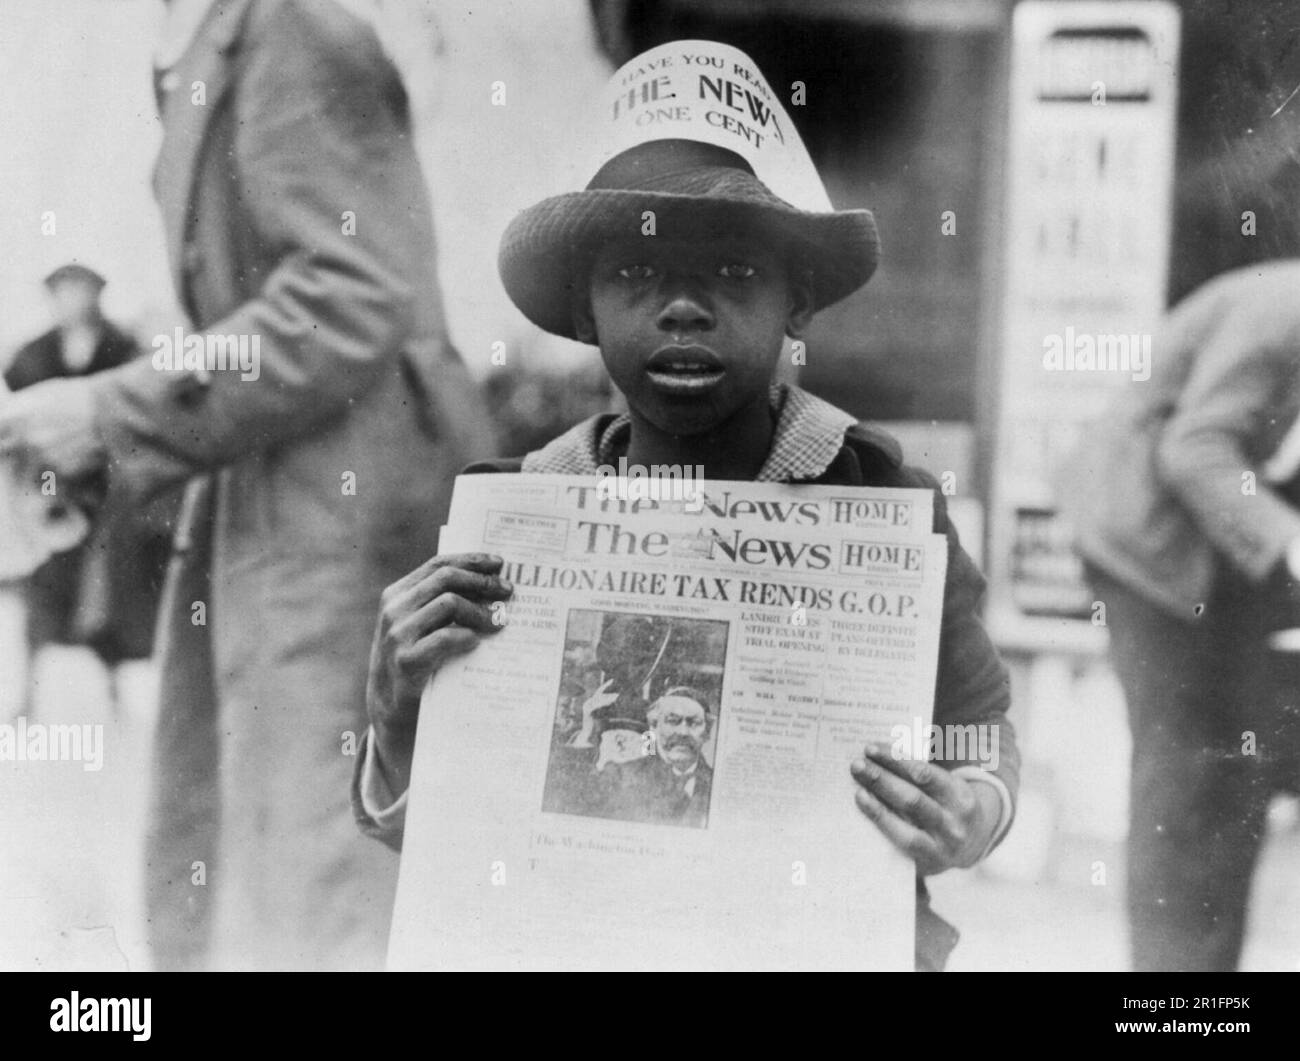 Archival Photo: African American boy selling The Washington Daily News - sign on his hat reads, 'Have you read The News? One cent' - headline reads 'Millionaire tax rends G.O.P.' ca. 1921 Stock Photo